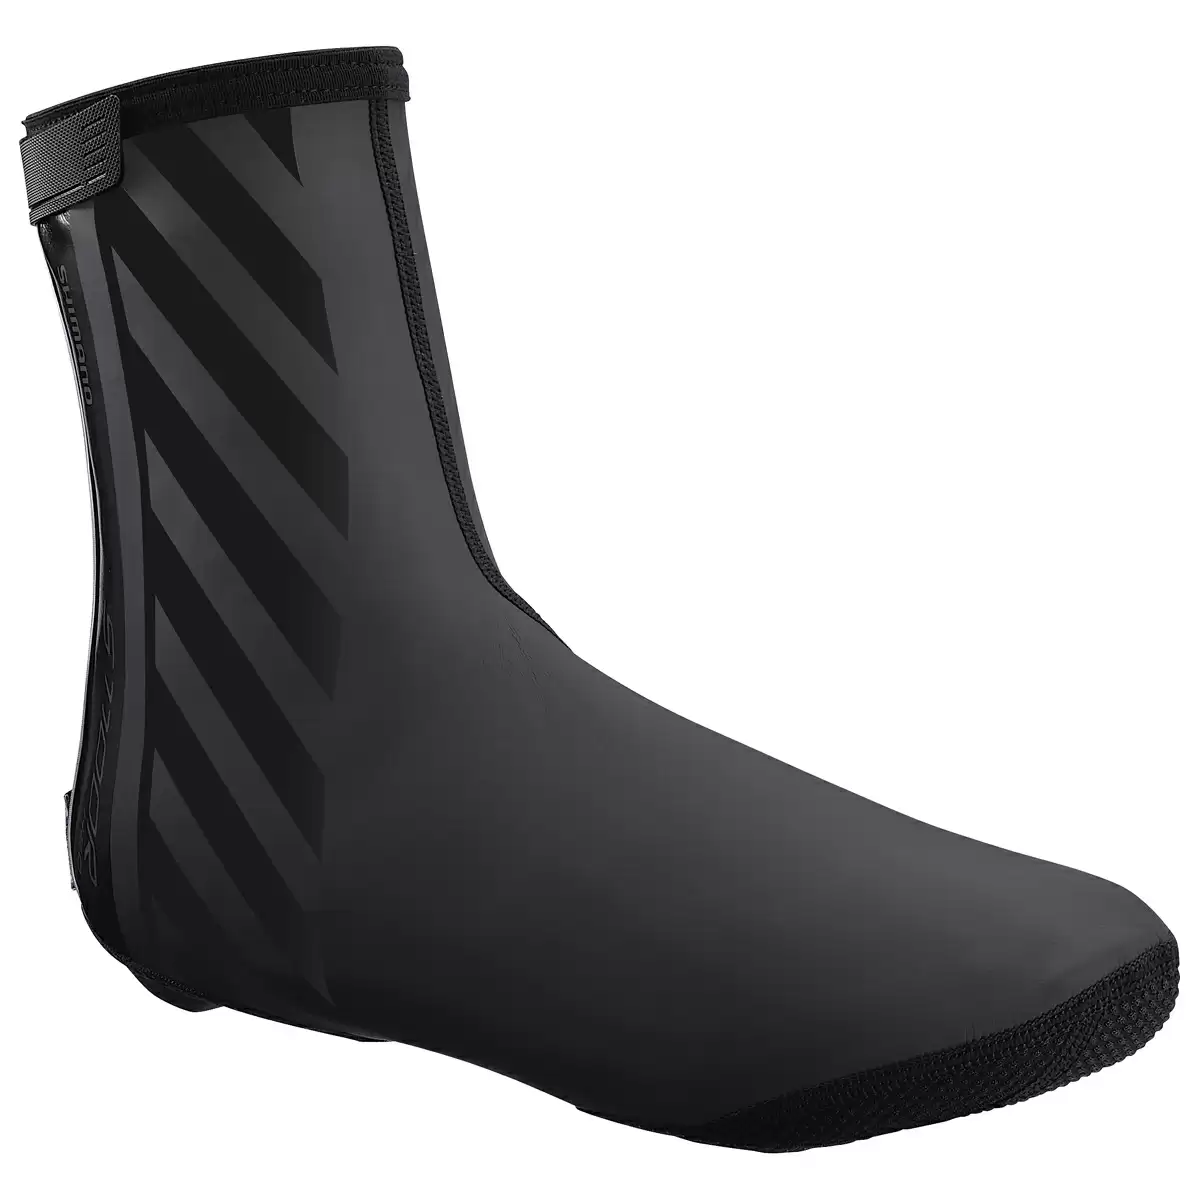 Shoe covers road S1100R H2O black size S (37-40) - image